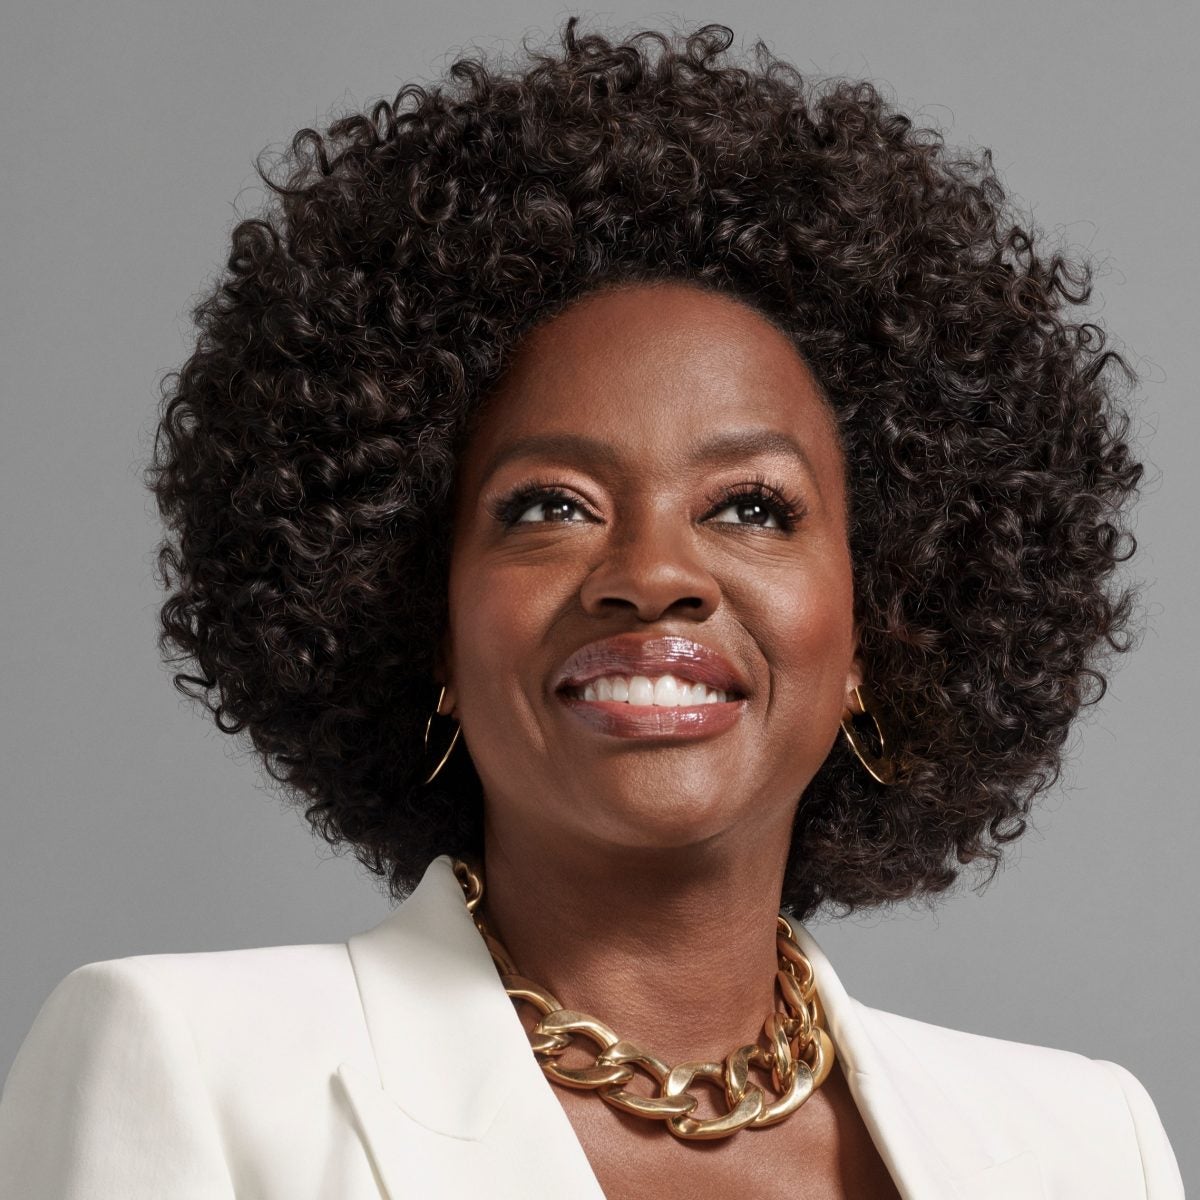 Actress Viola Davis On The Beauty Of Aging And The Importance Of Apologizing To Her Daughter